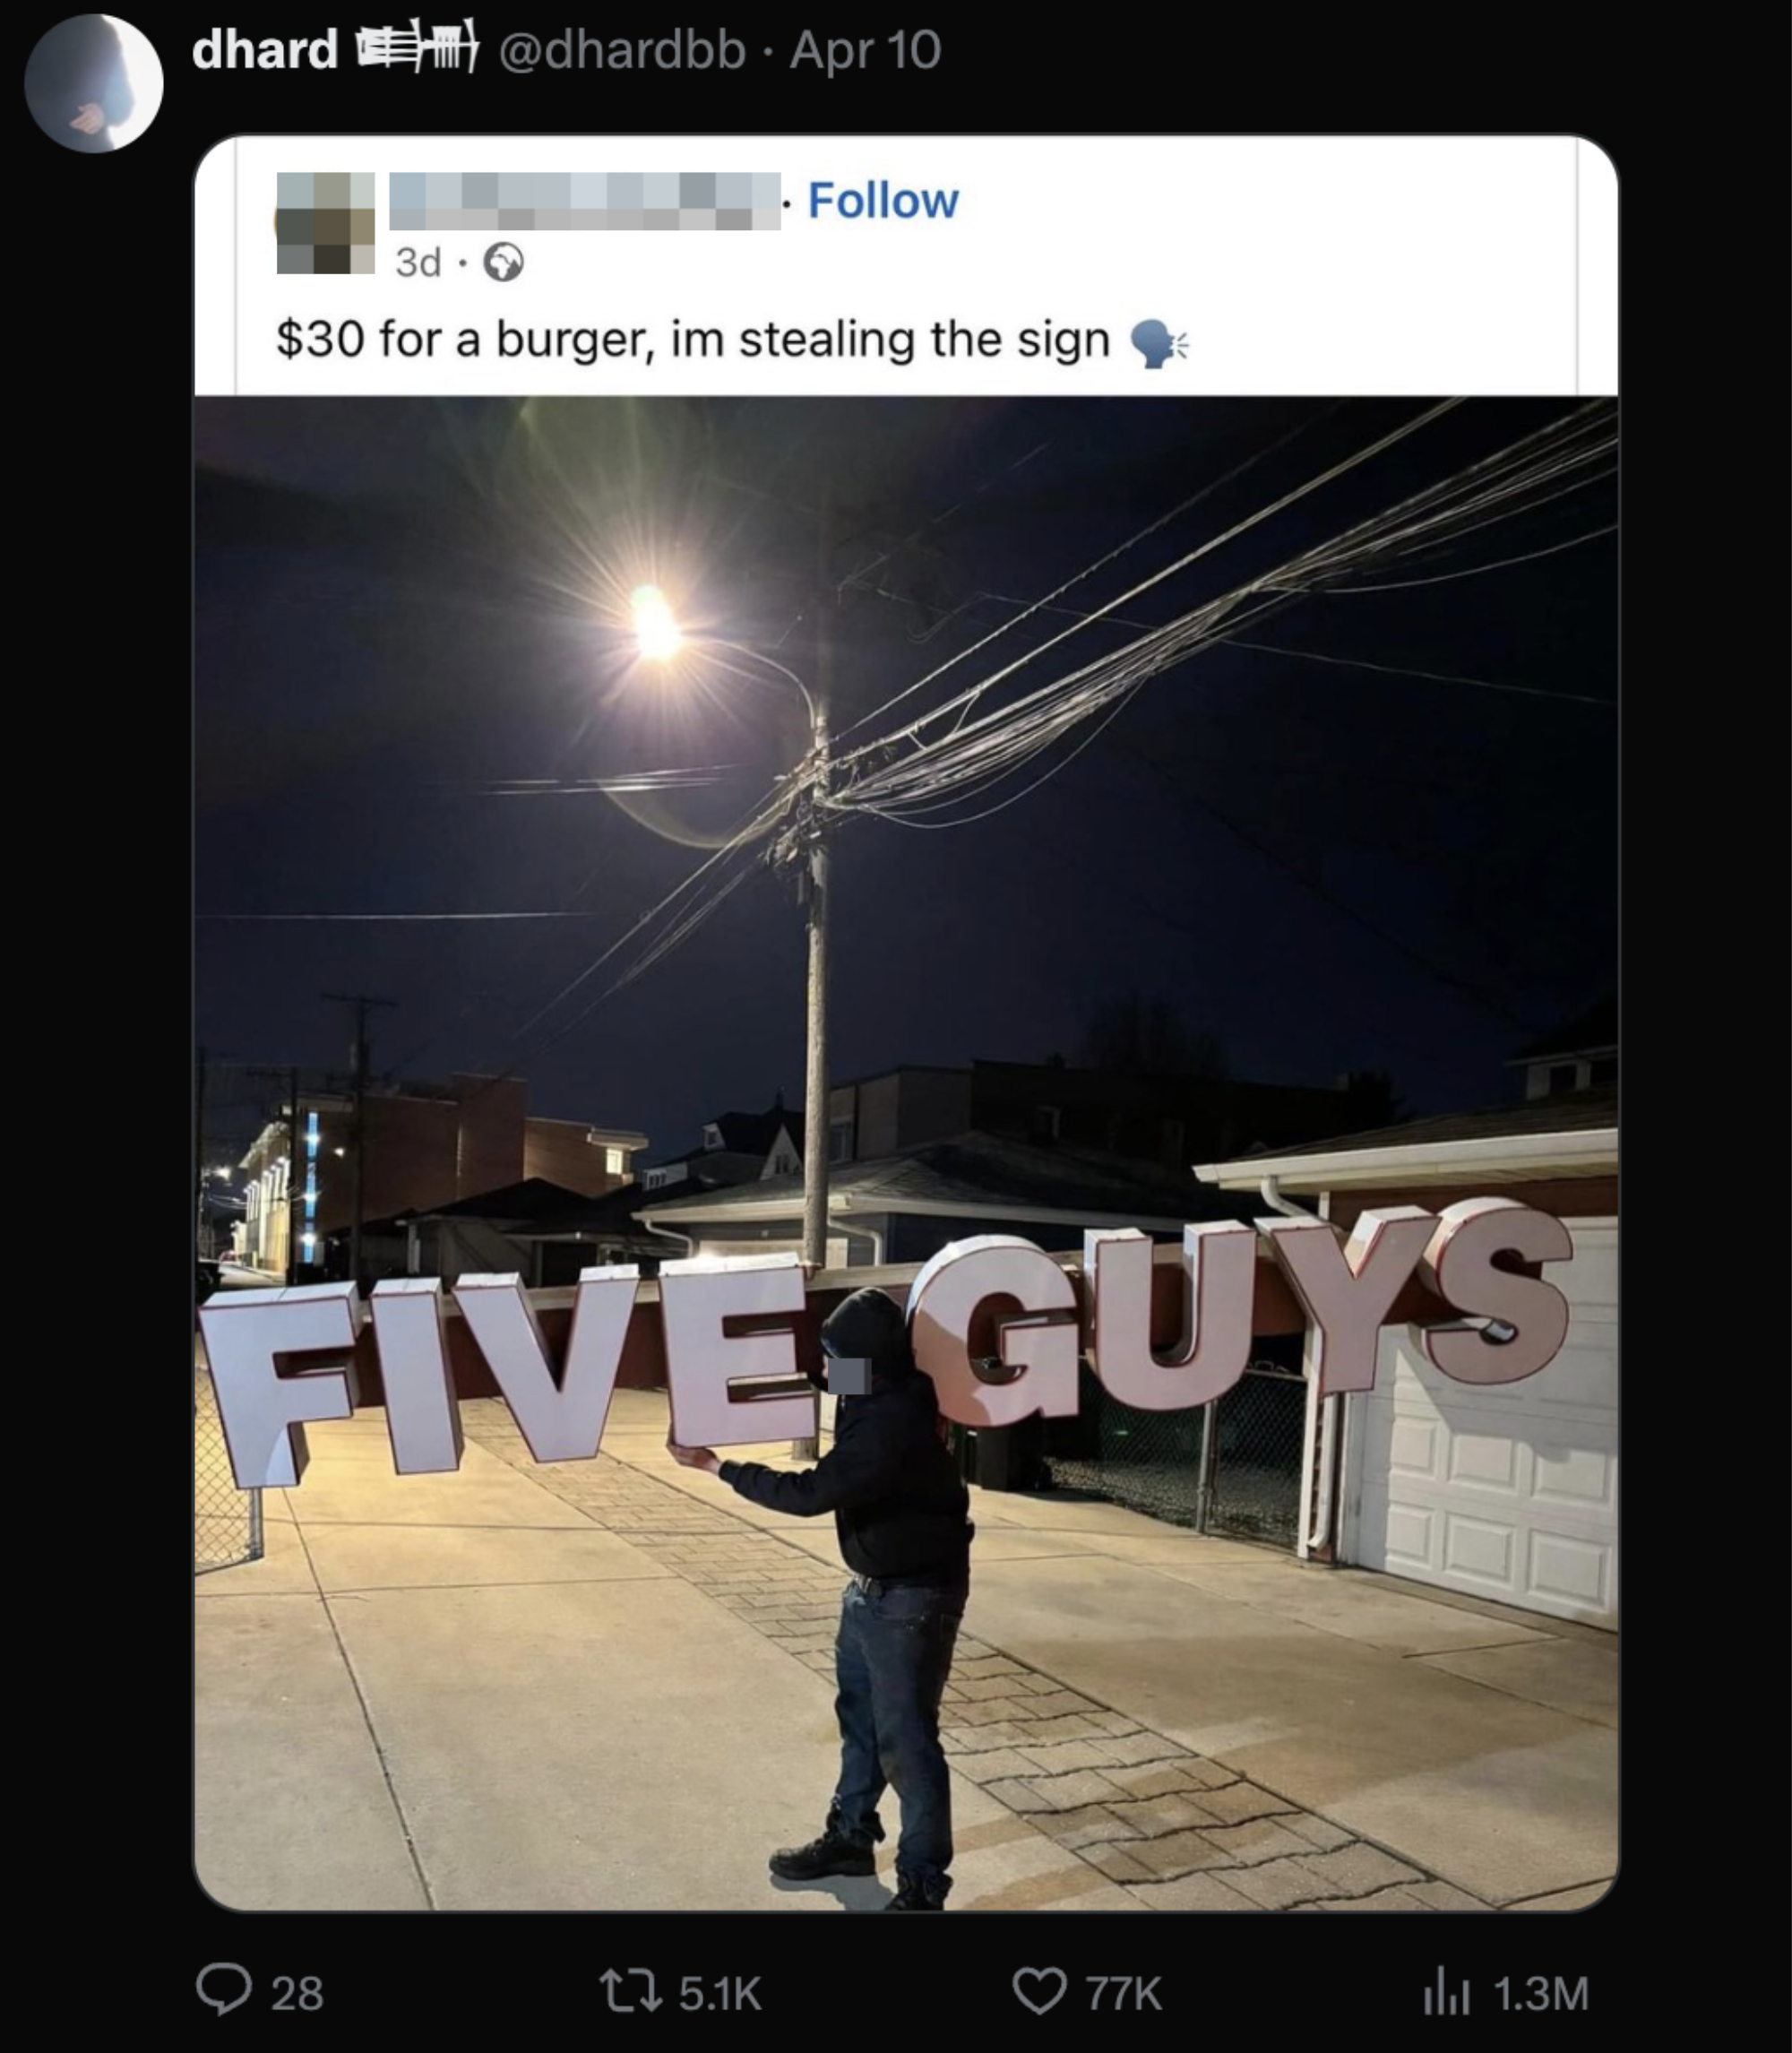 Person holding a large &quot;FIVE GUYS&quot; sign at night on a street